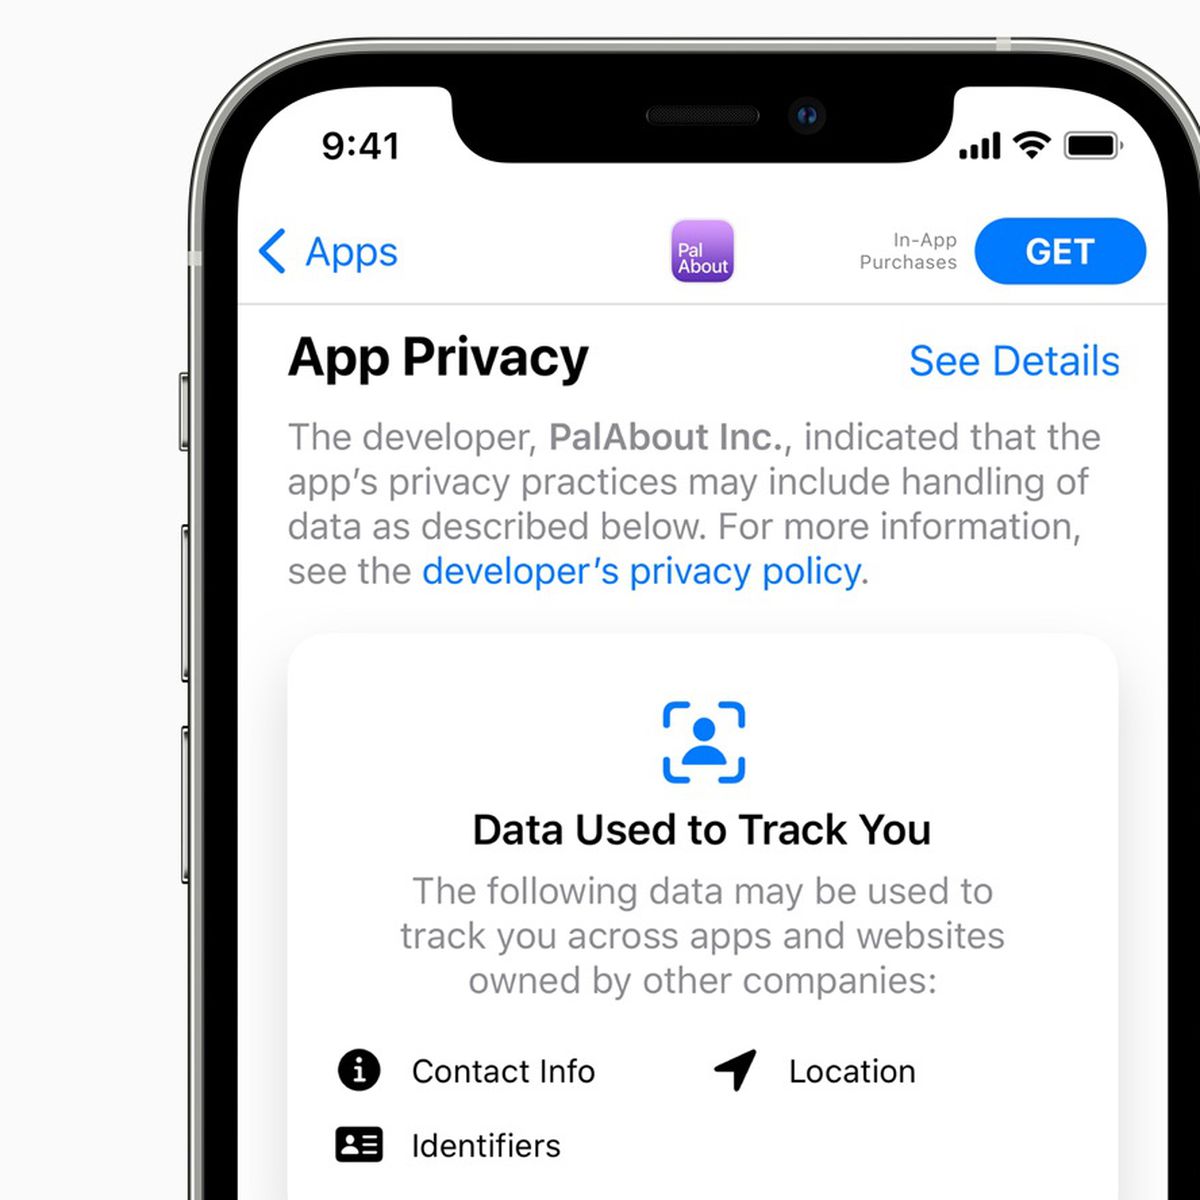 Is the app privacy worth paying attention to in the App Store